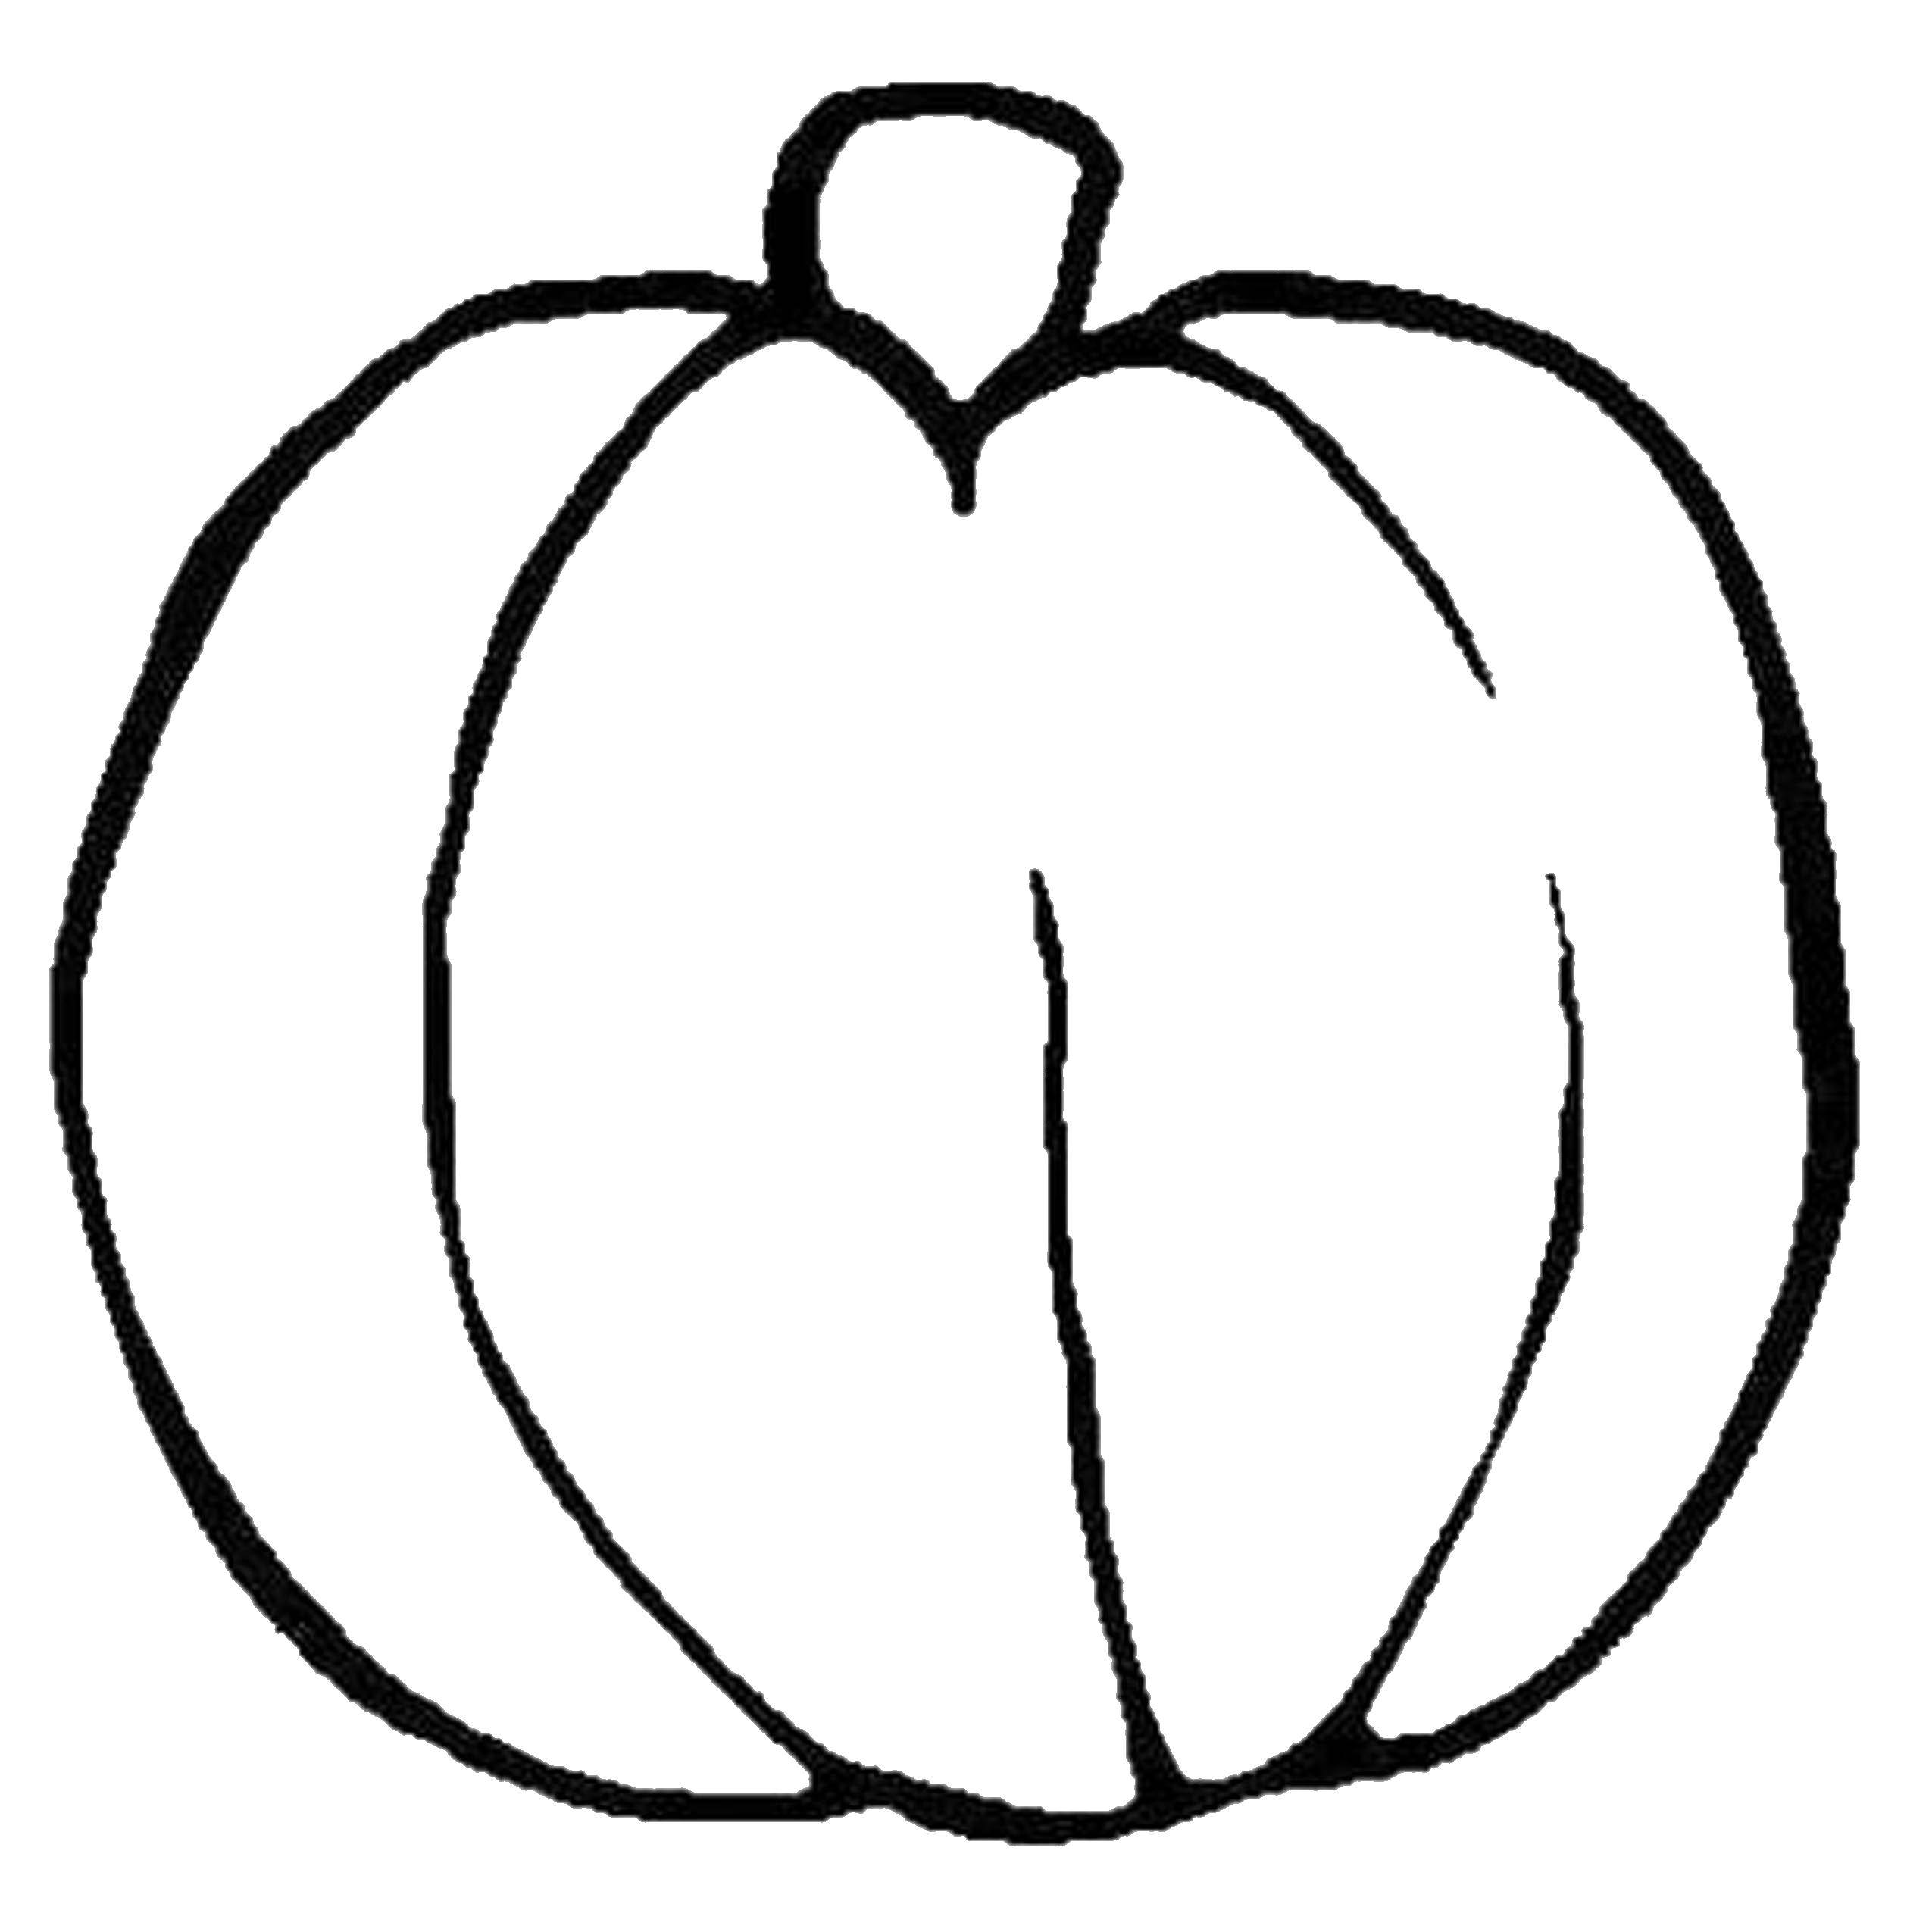 Coloring The contour of the pumpkin to carving. Category Autumn. Tags:  pumpkin.